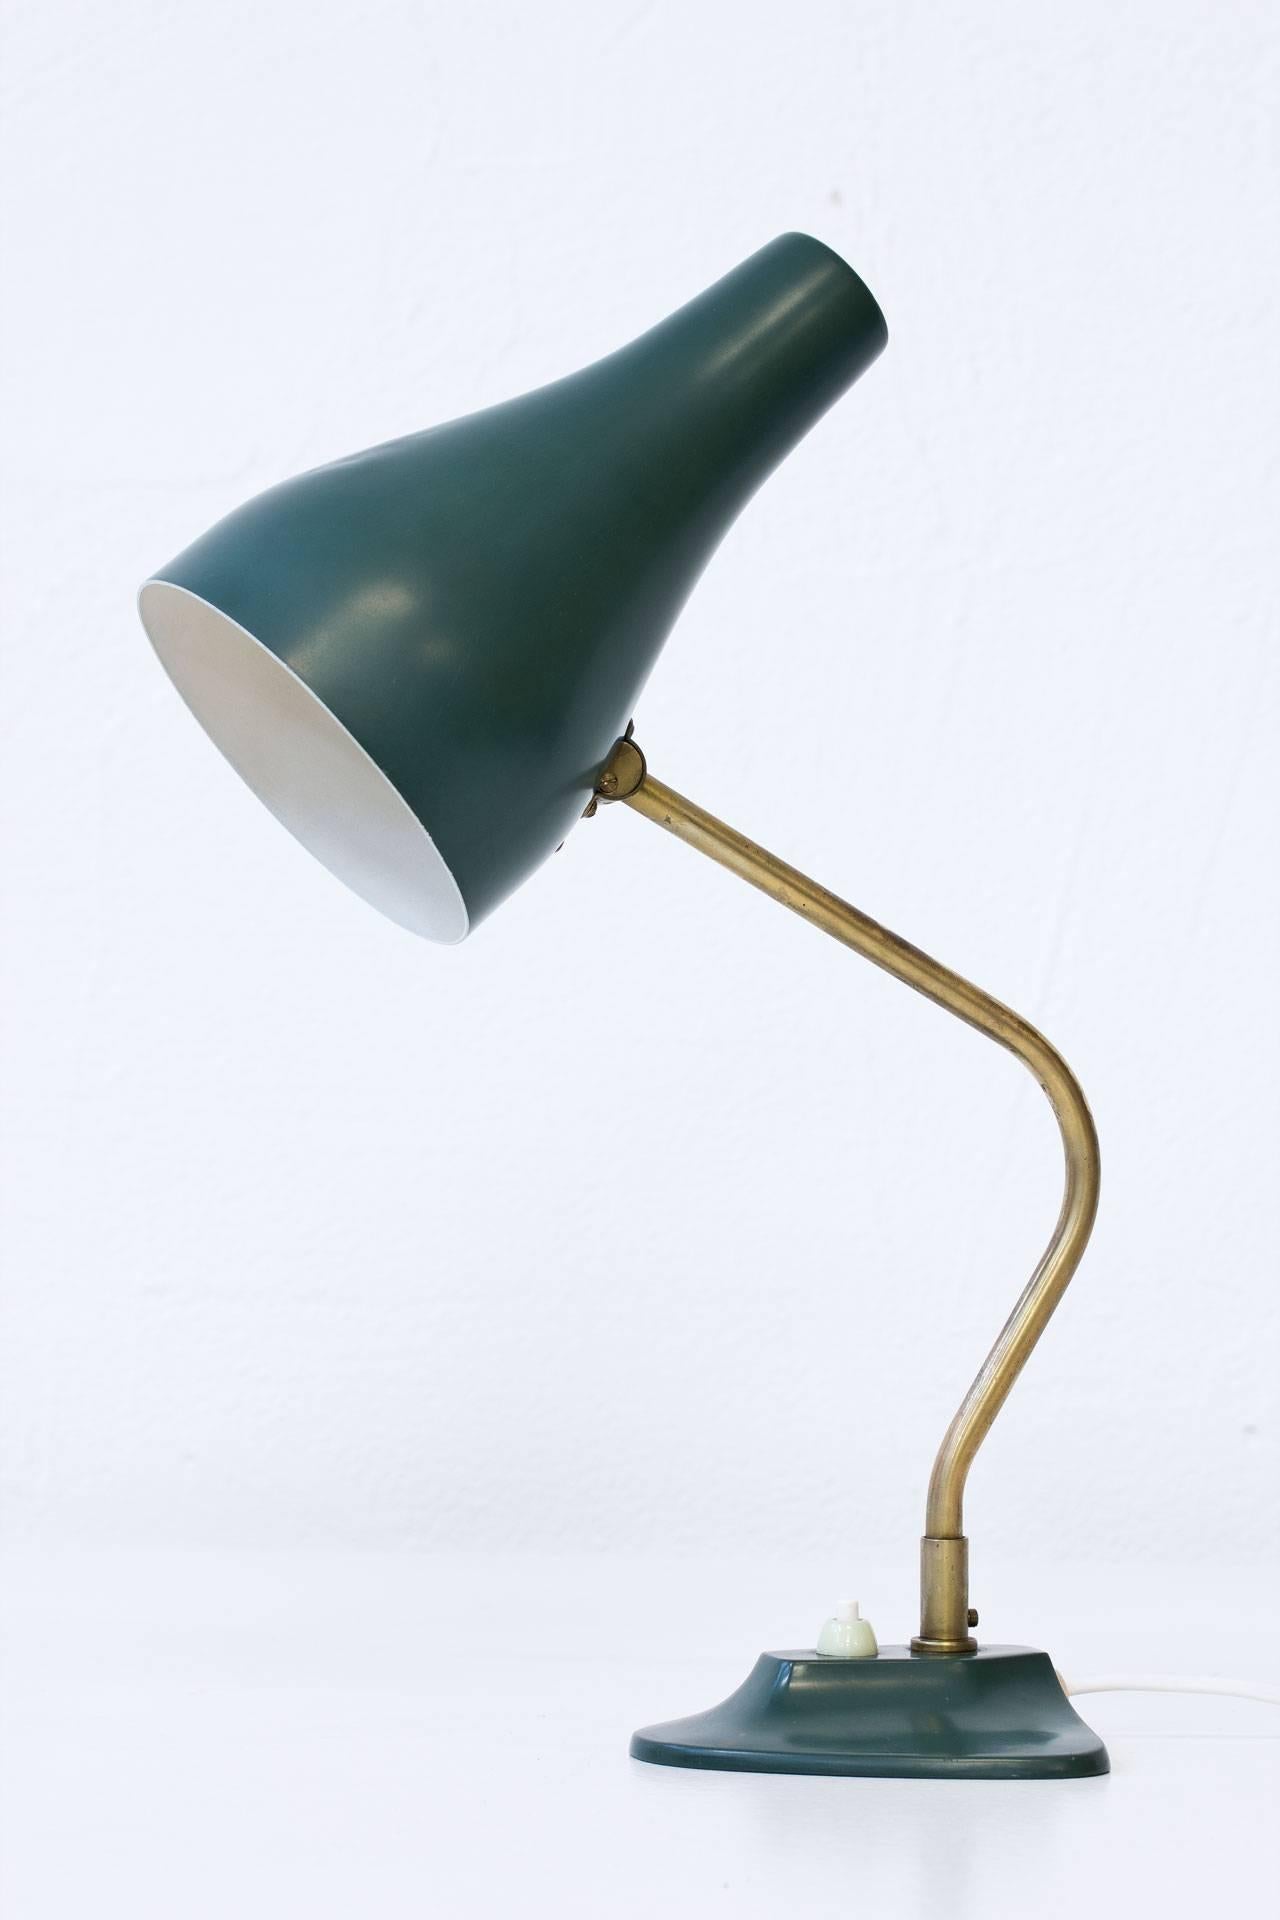 Swedish table lamp manufactured by ASEA during the 1950s. 
Brass stem with diffuser and base in green painted metal. 
Adjustable shade and axis. Signed on bottom.